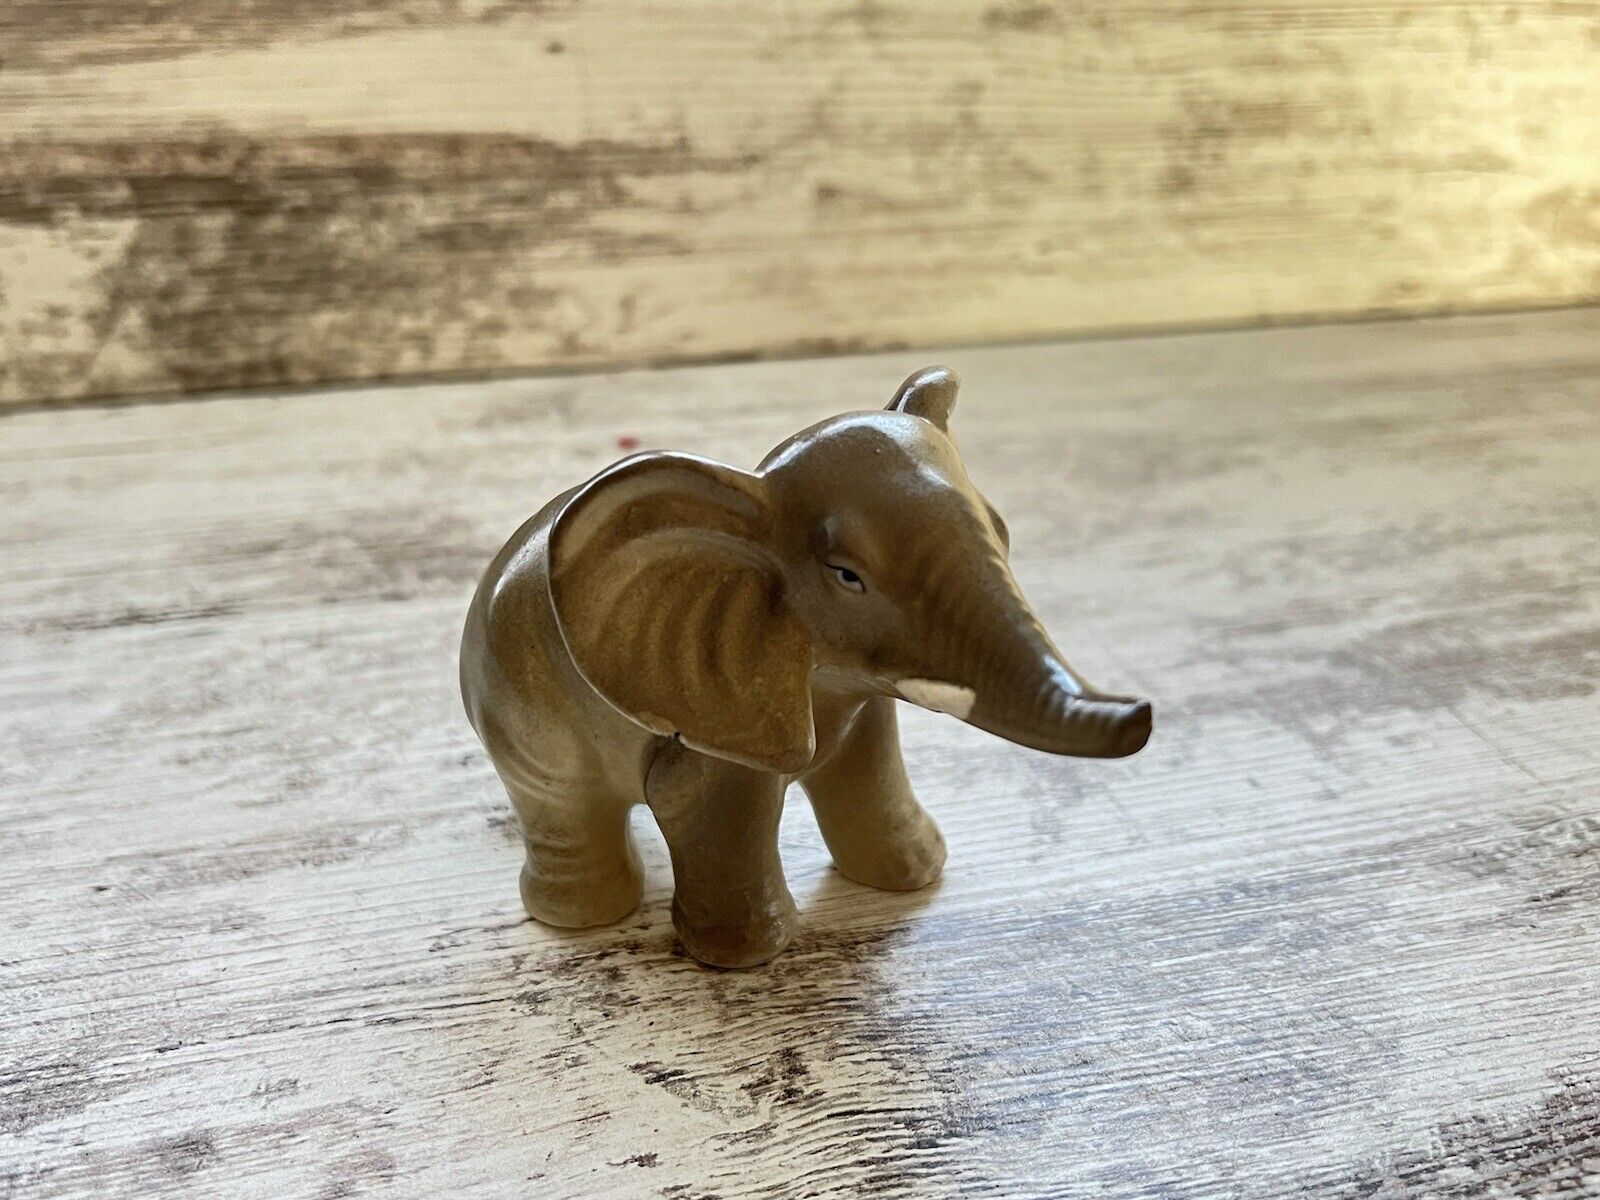 Incredibly Cute Vintage Porcelain Elephant Made in Japan